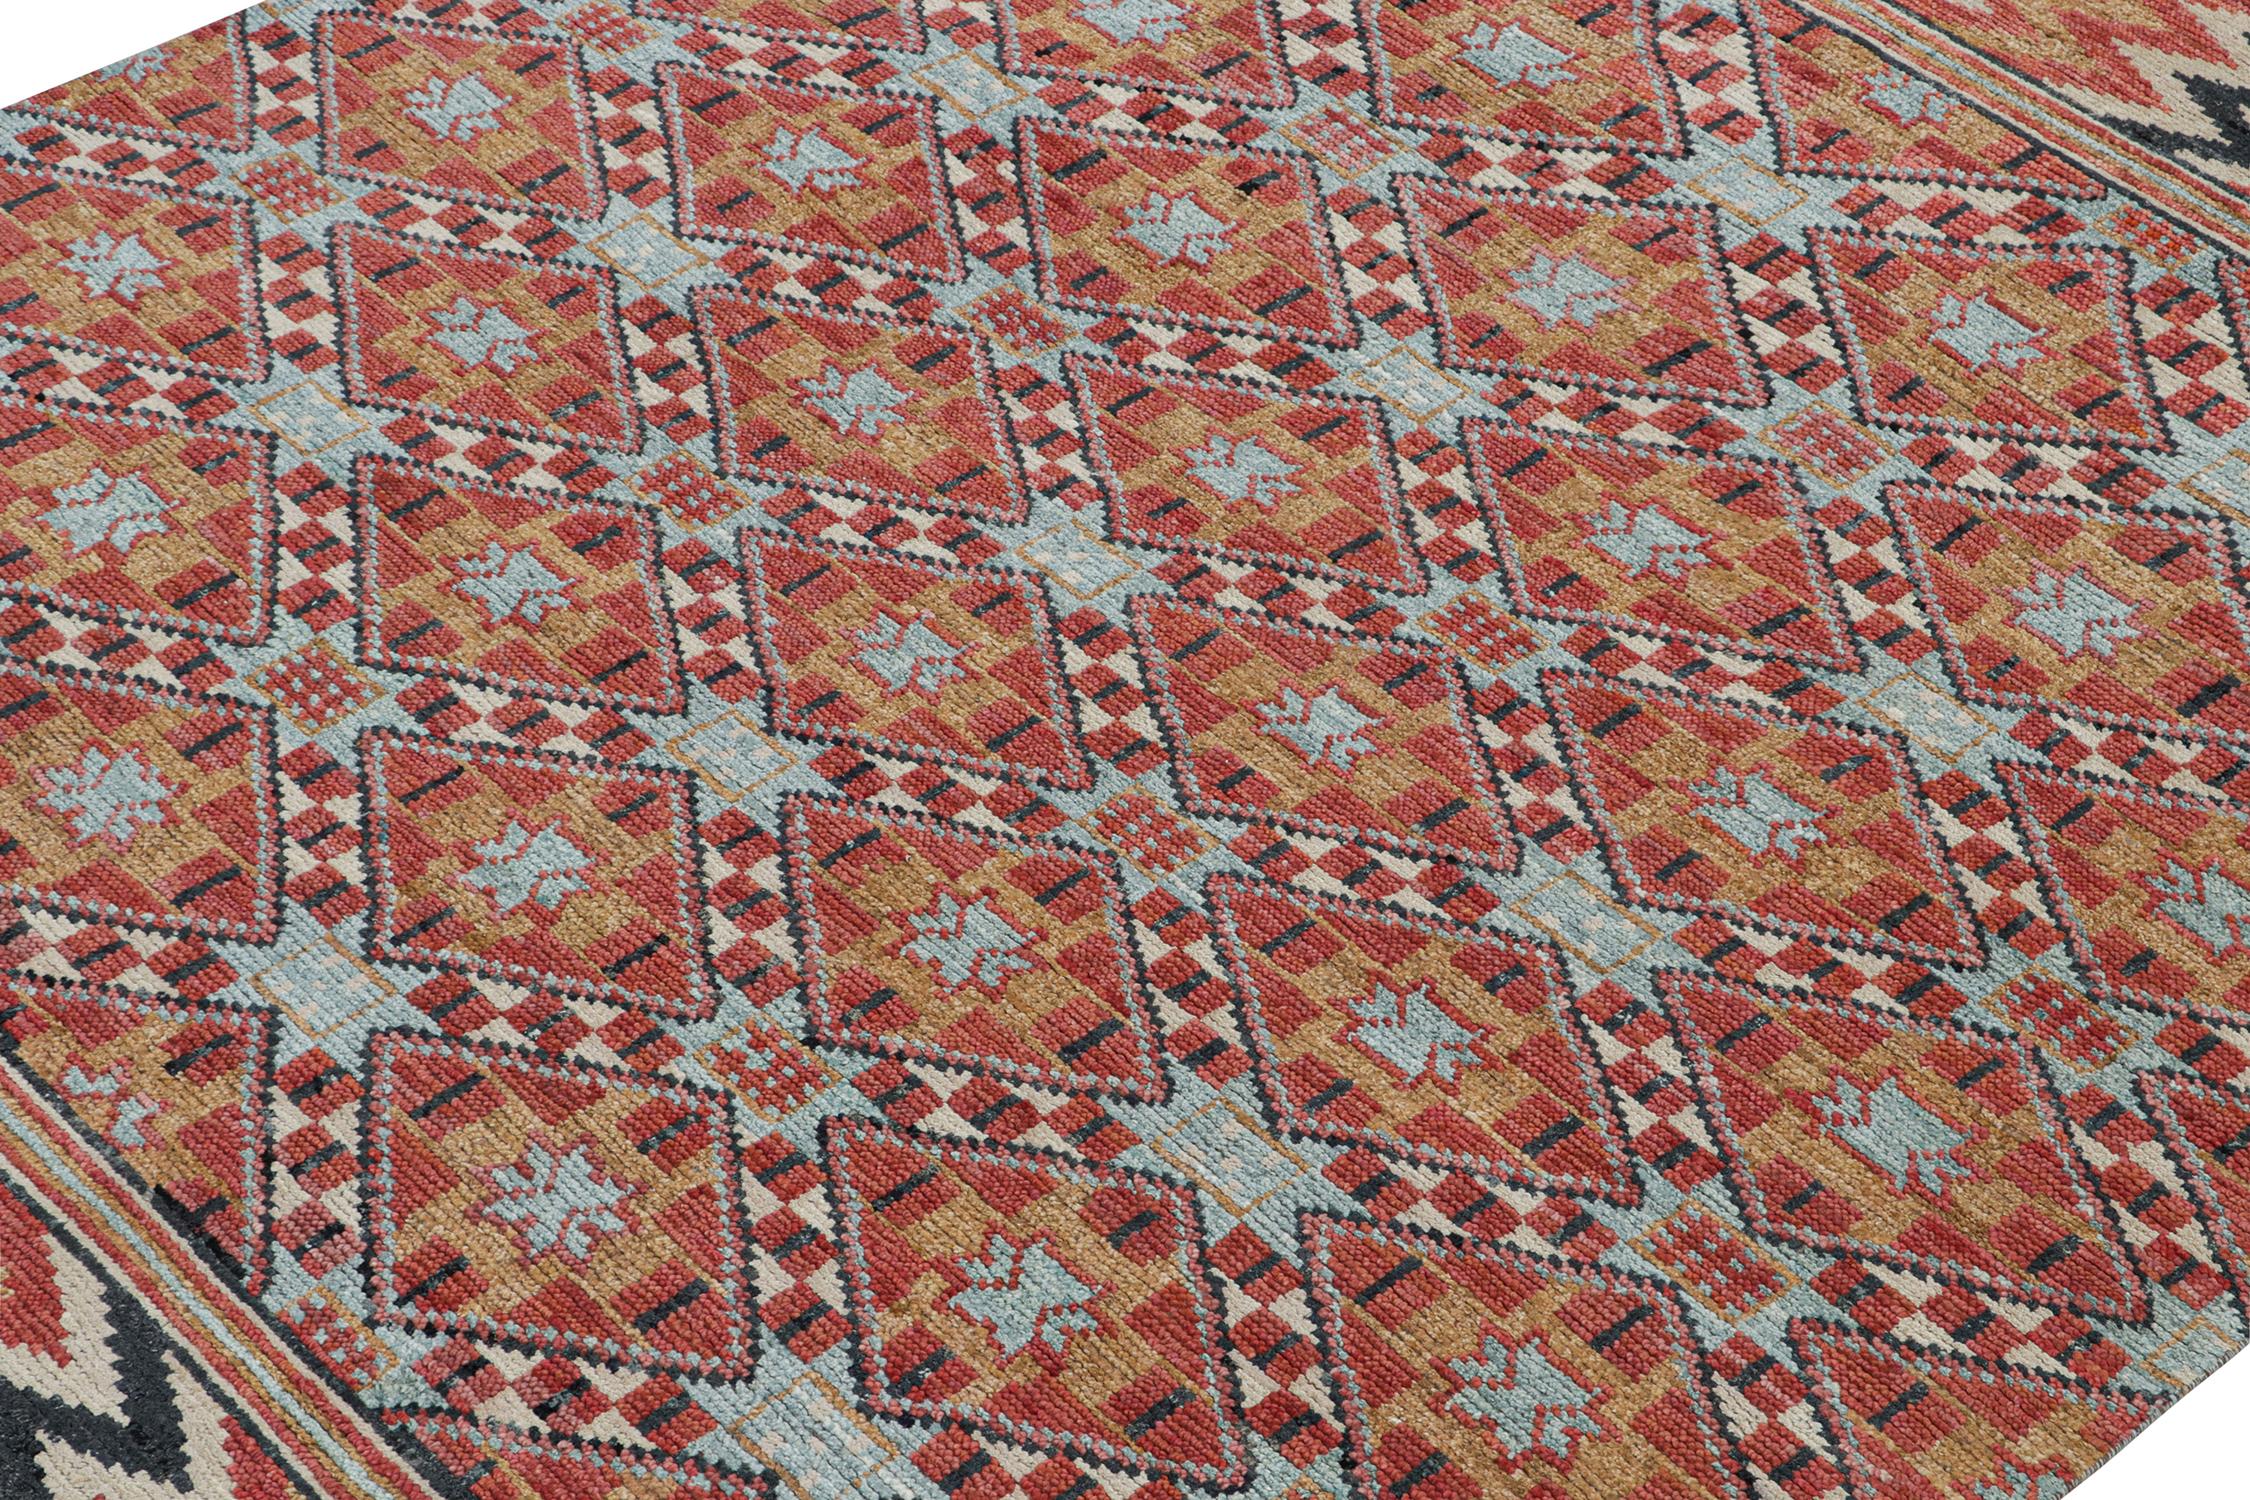 Indian Rug & Kilim’s Moroccan Style Rug in Orange, Blue & Brown Geometric Pattern For Sale